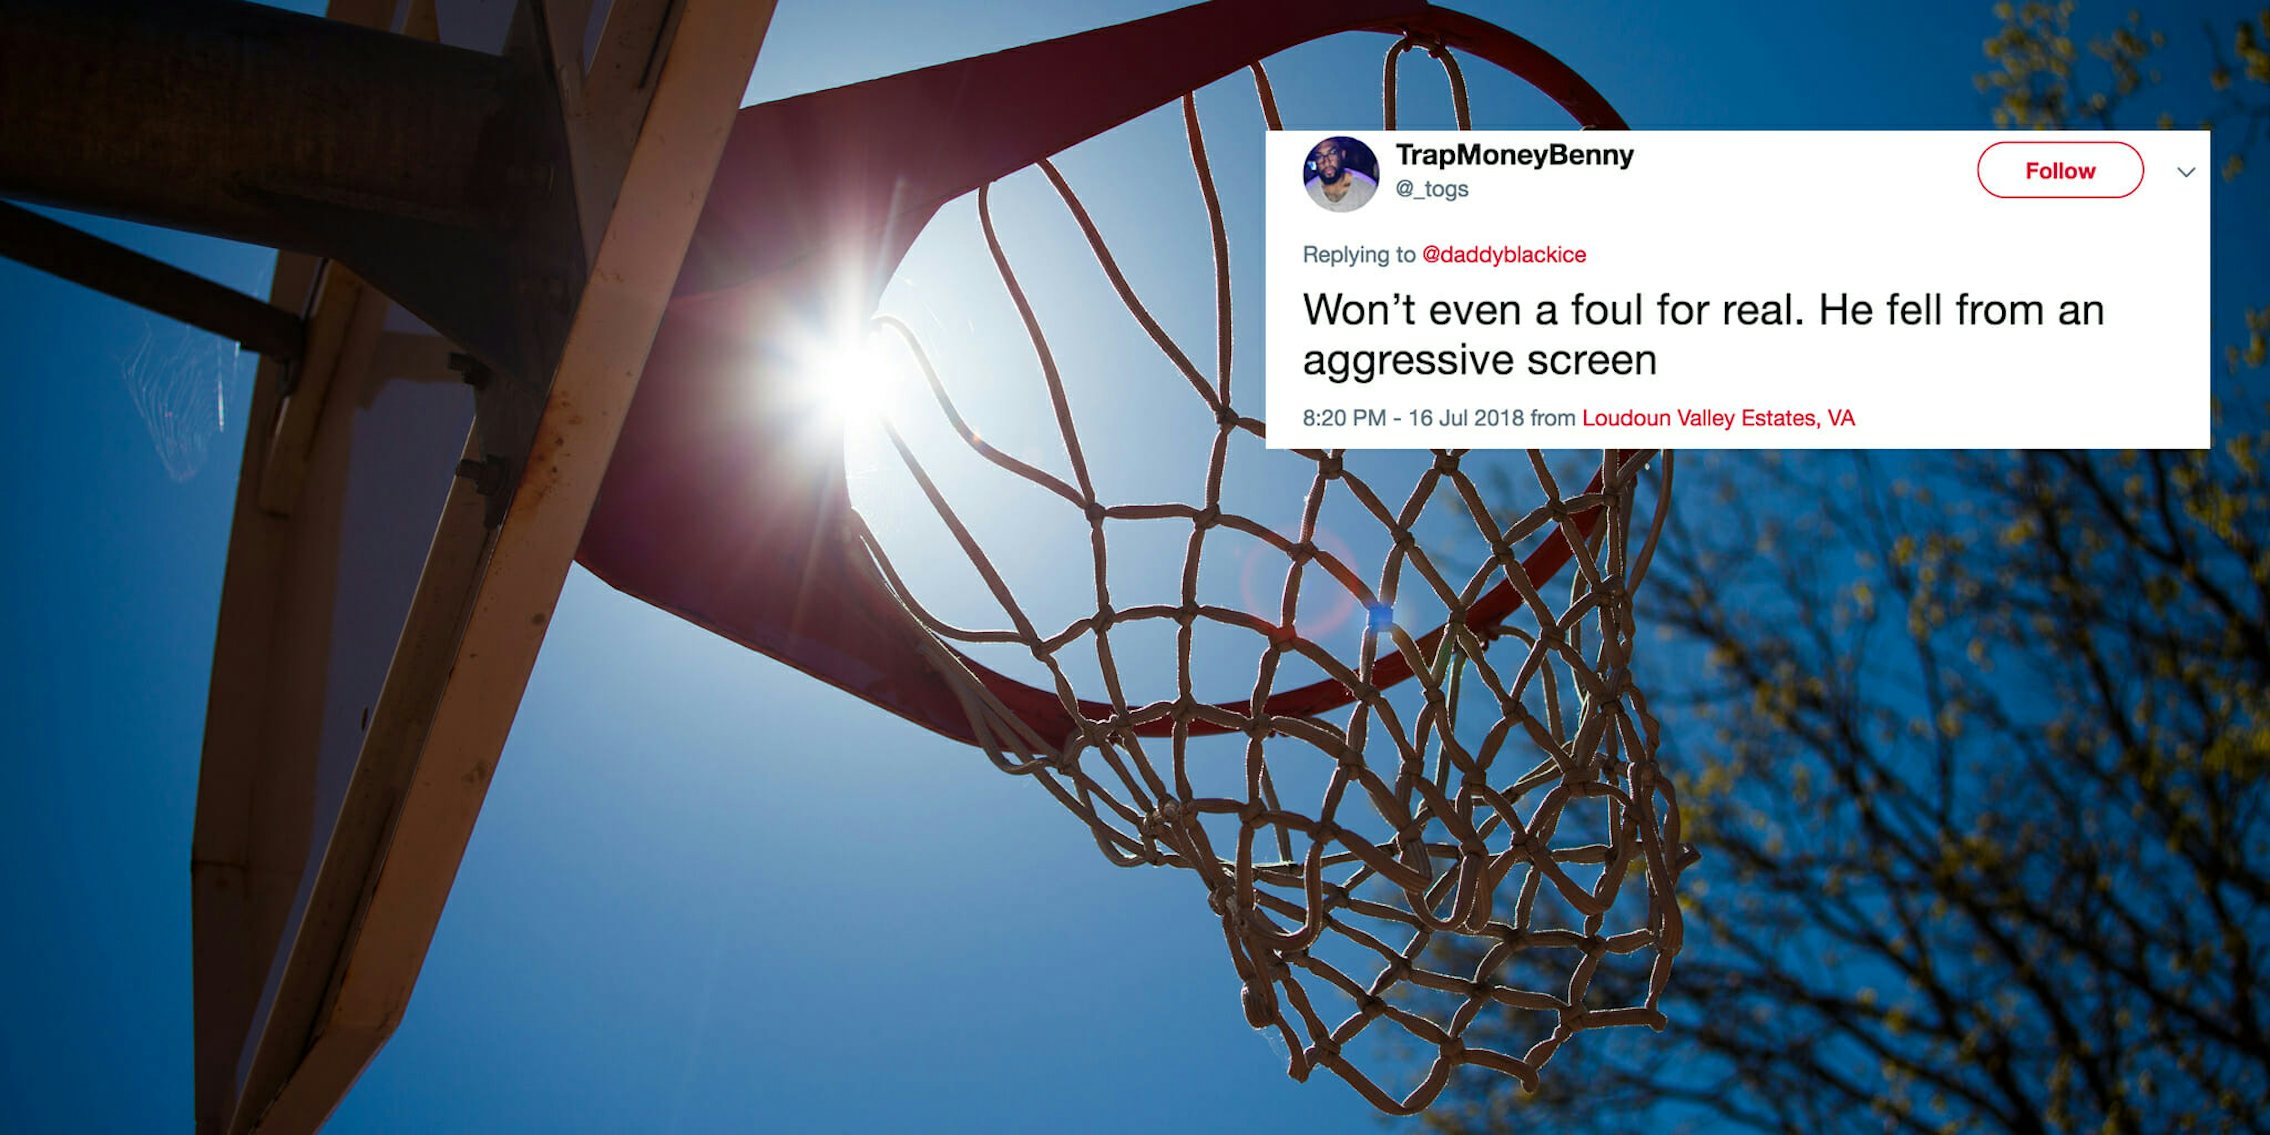 The police were called during a game of pickup basketball in Virginia.